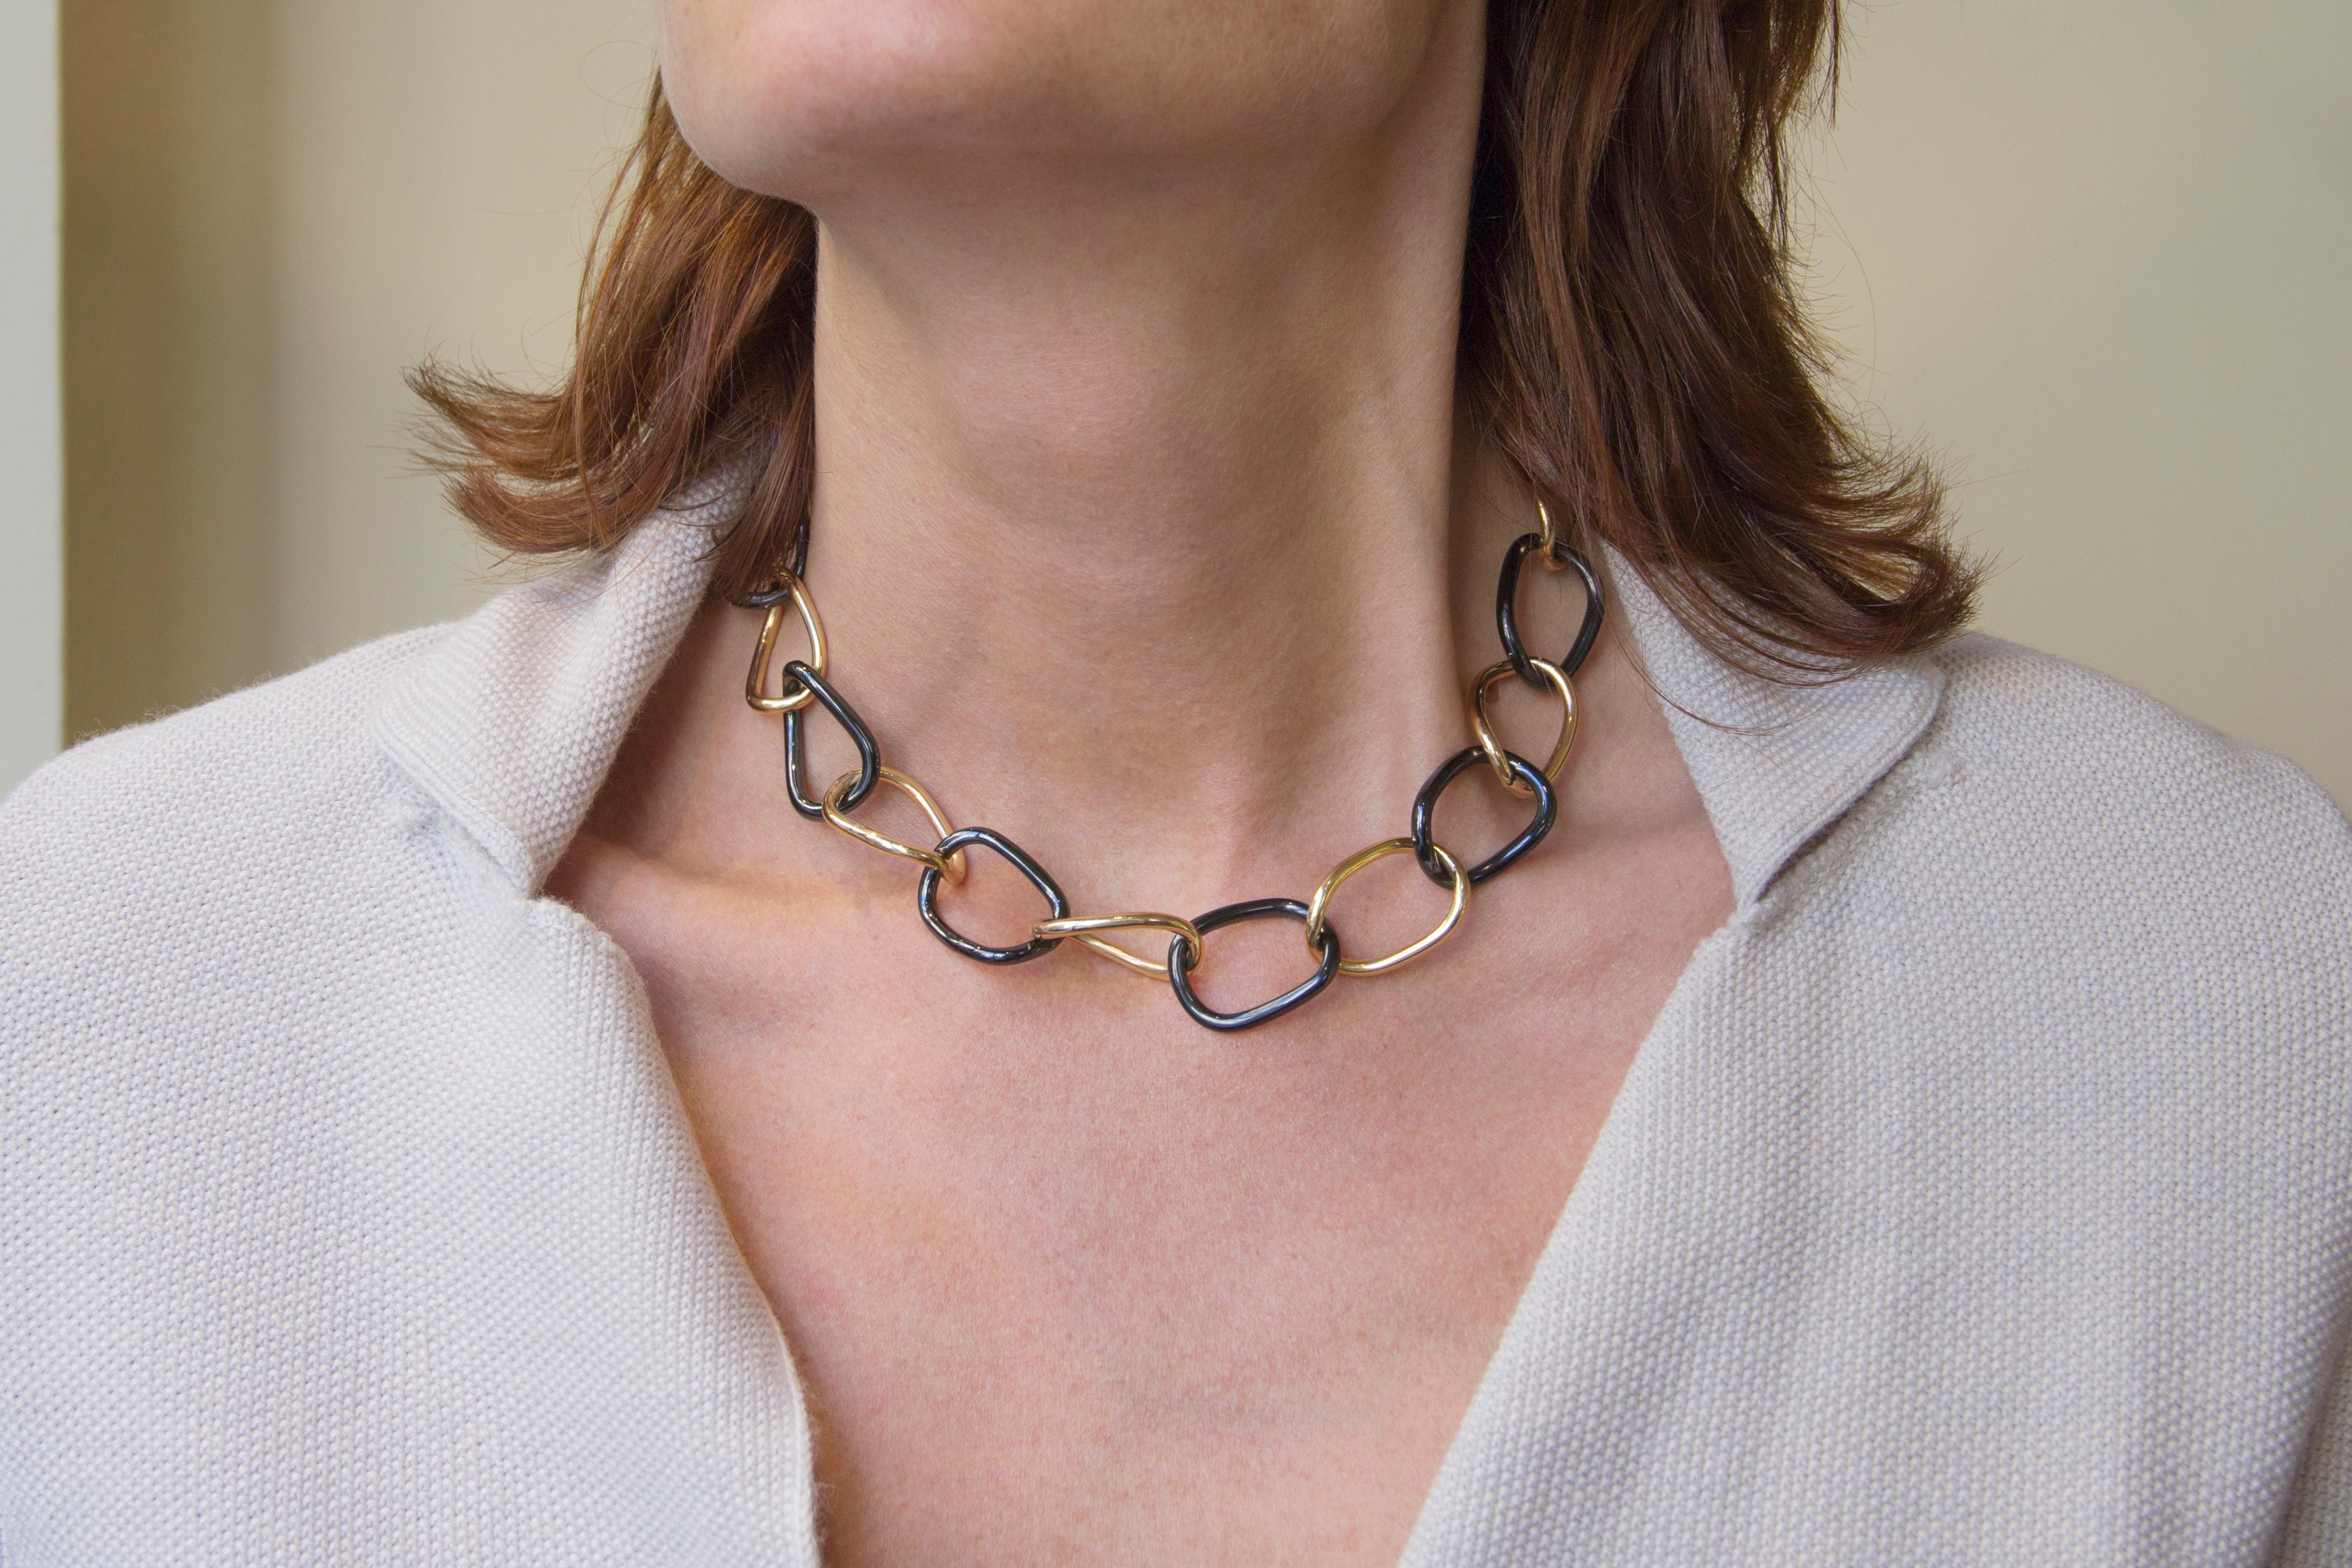 Alex Jona design collection, hand crafted in Italy, alternating 18k yellow gold and black high-tech ceramic curb-link necklace.
With a hardness approaching that of diamond, high-tech ceramic is a highly
scratch-resistant material. Light and